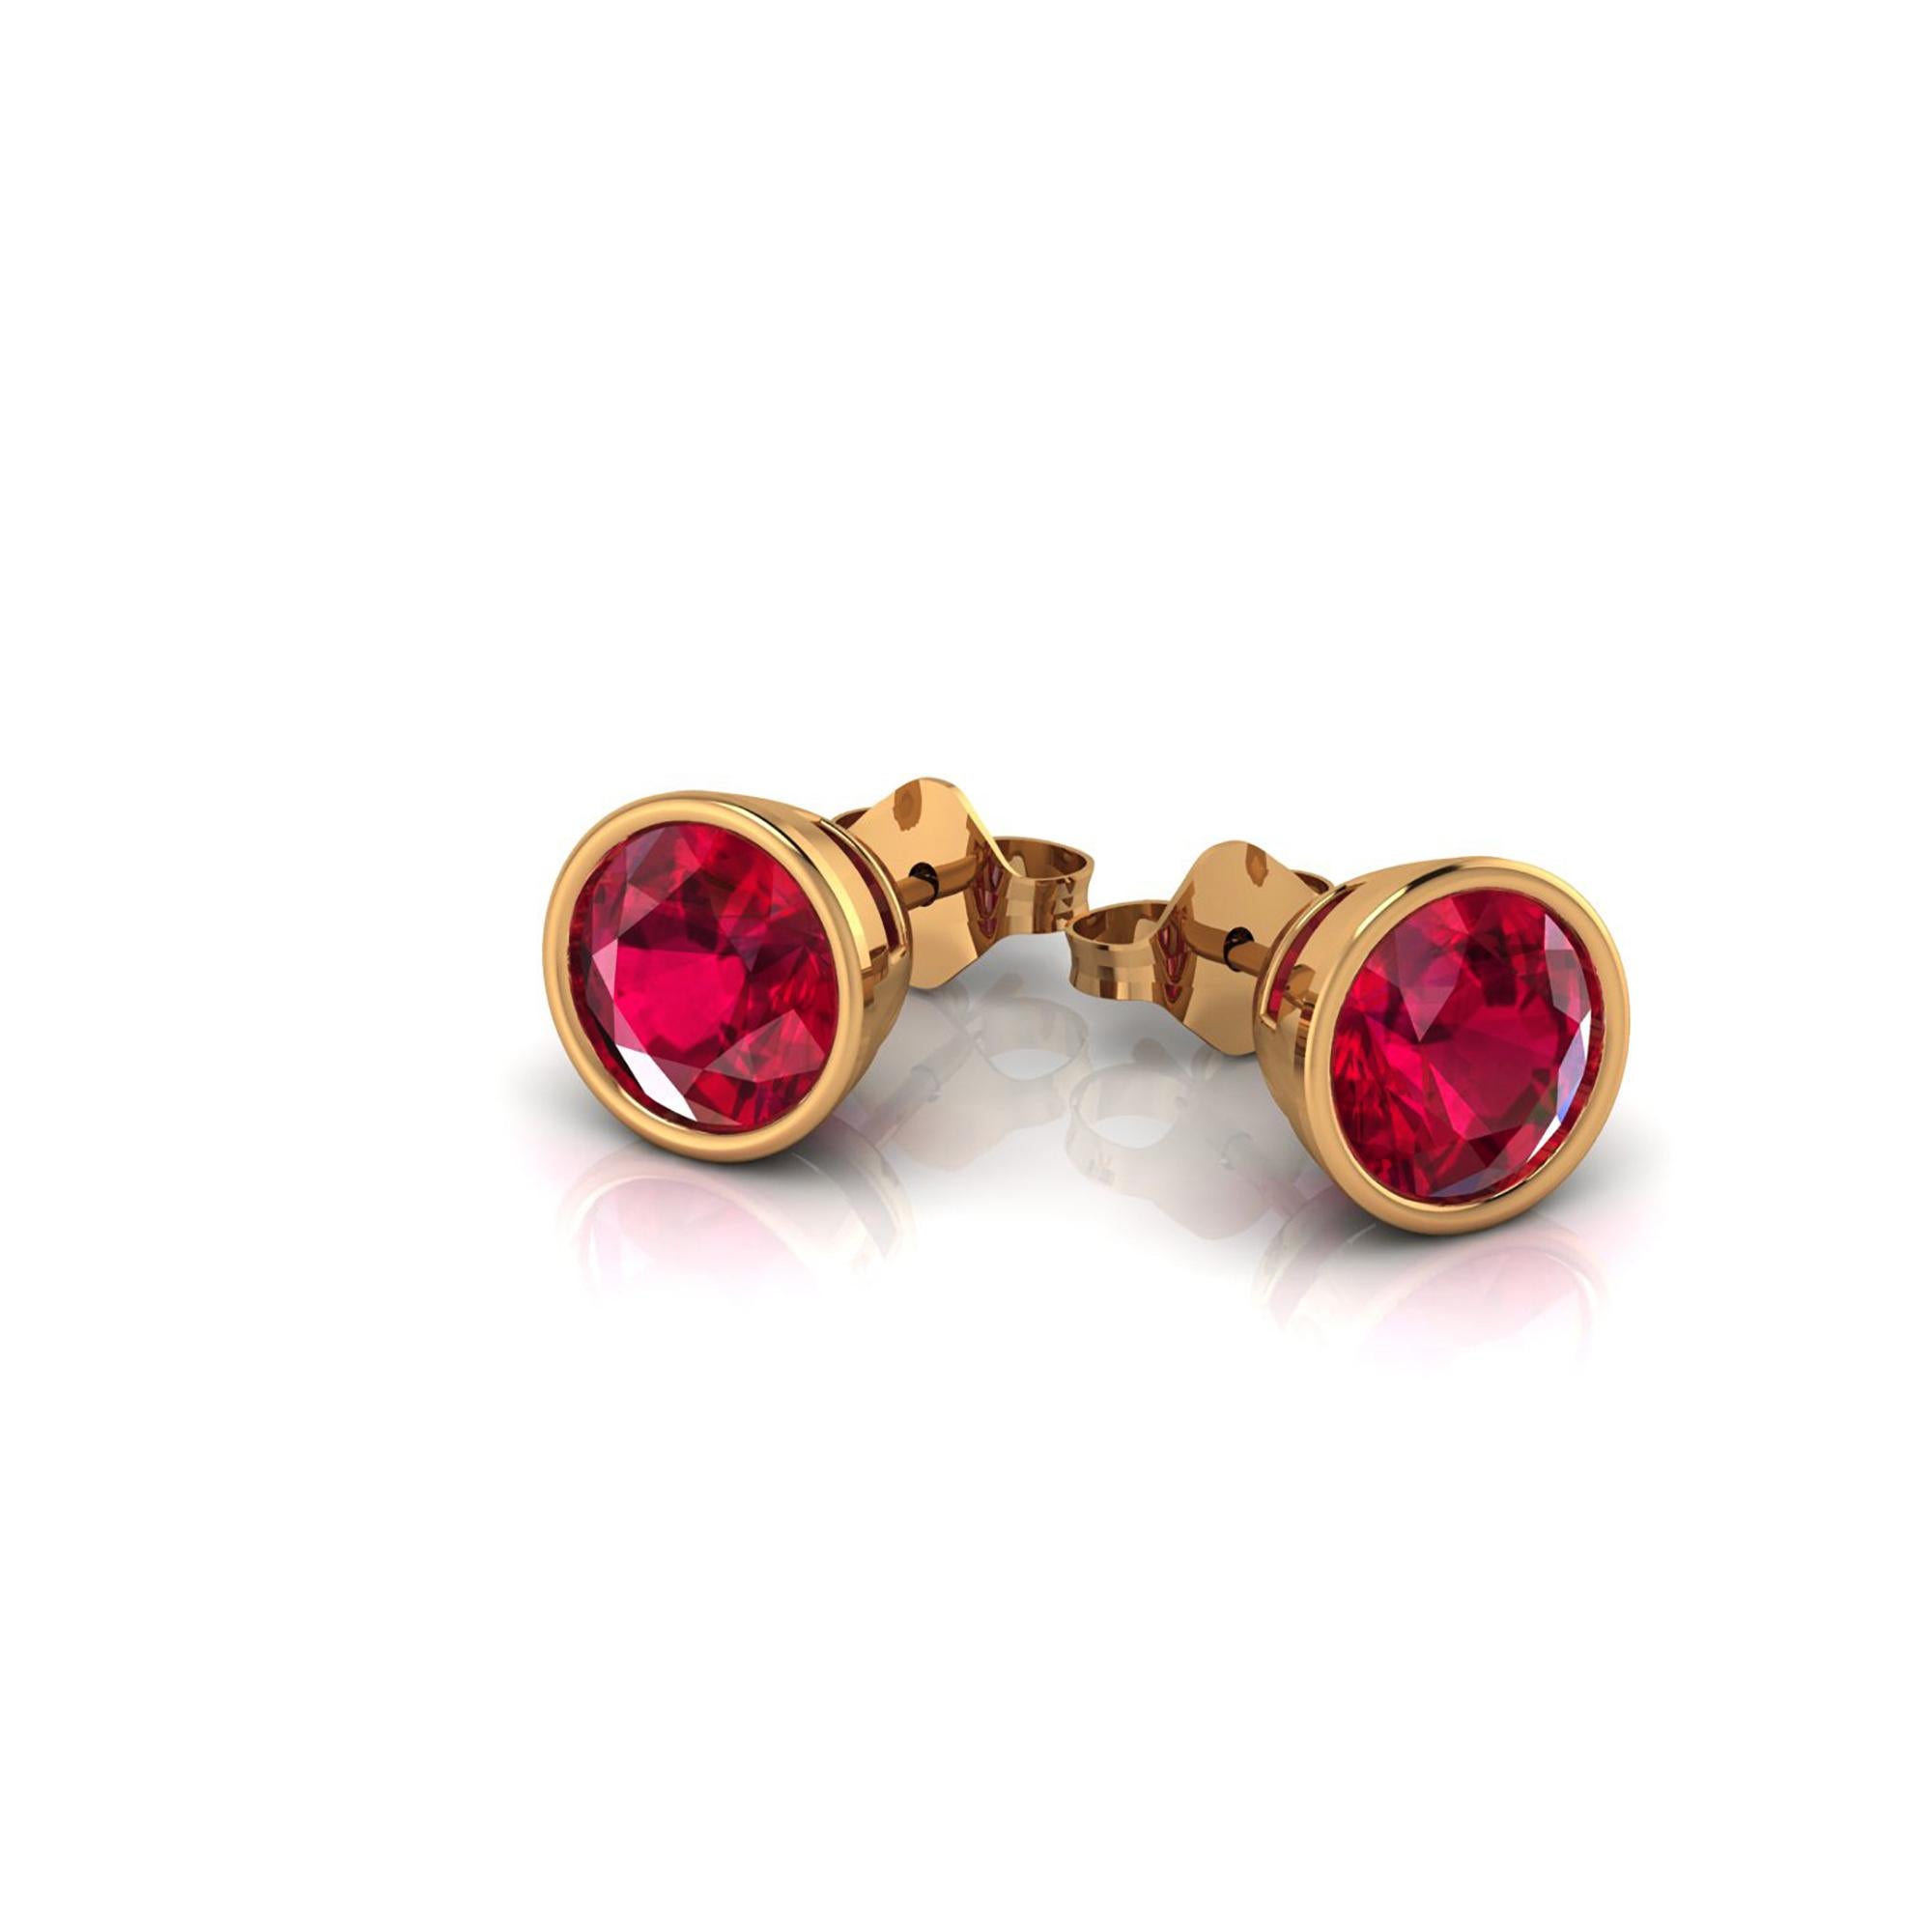 Gia Certified 3.88 carat pair of intense Red Rubies set in 18k yellow gold bezel stud earrings.
Push back and post, complimentary customization to screw back post, upon order.
Other customization available 